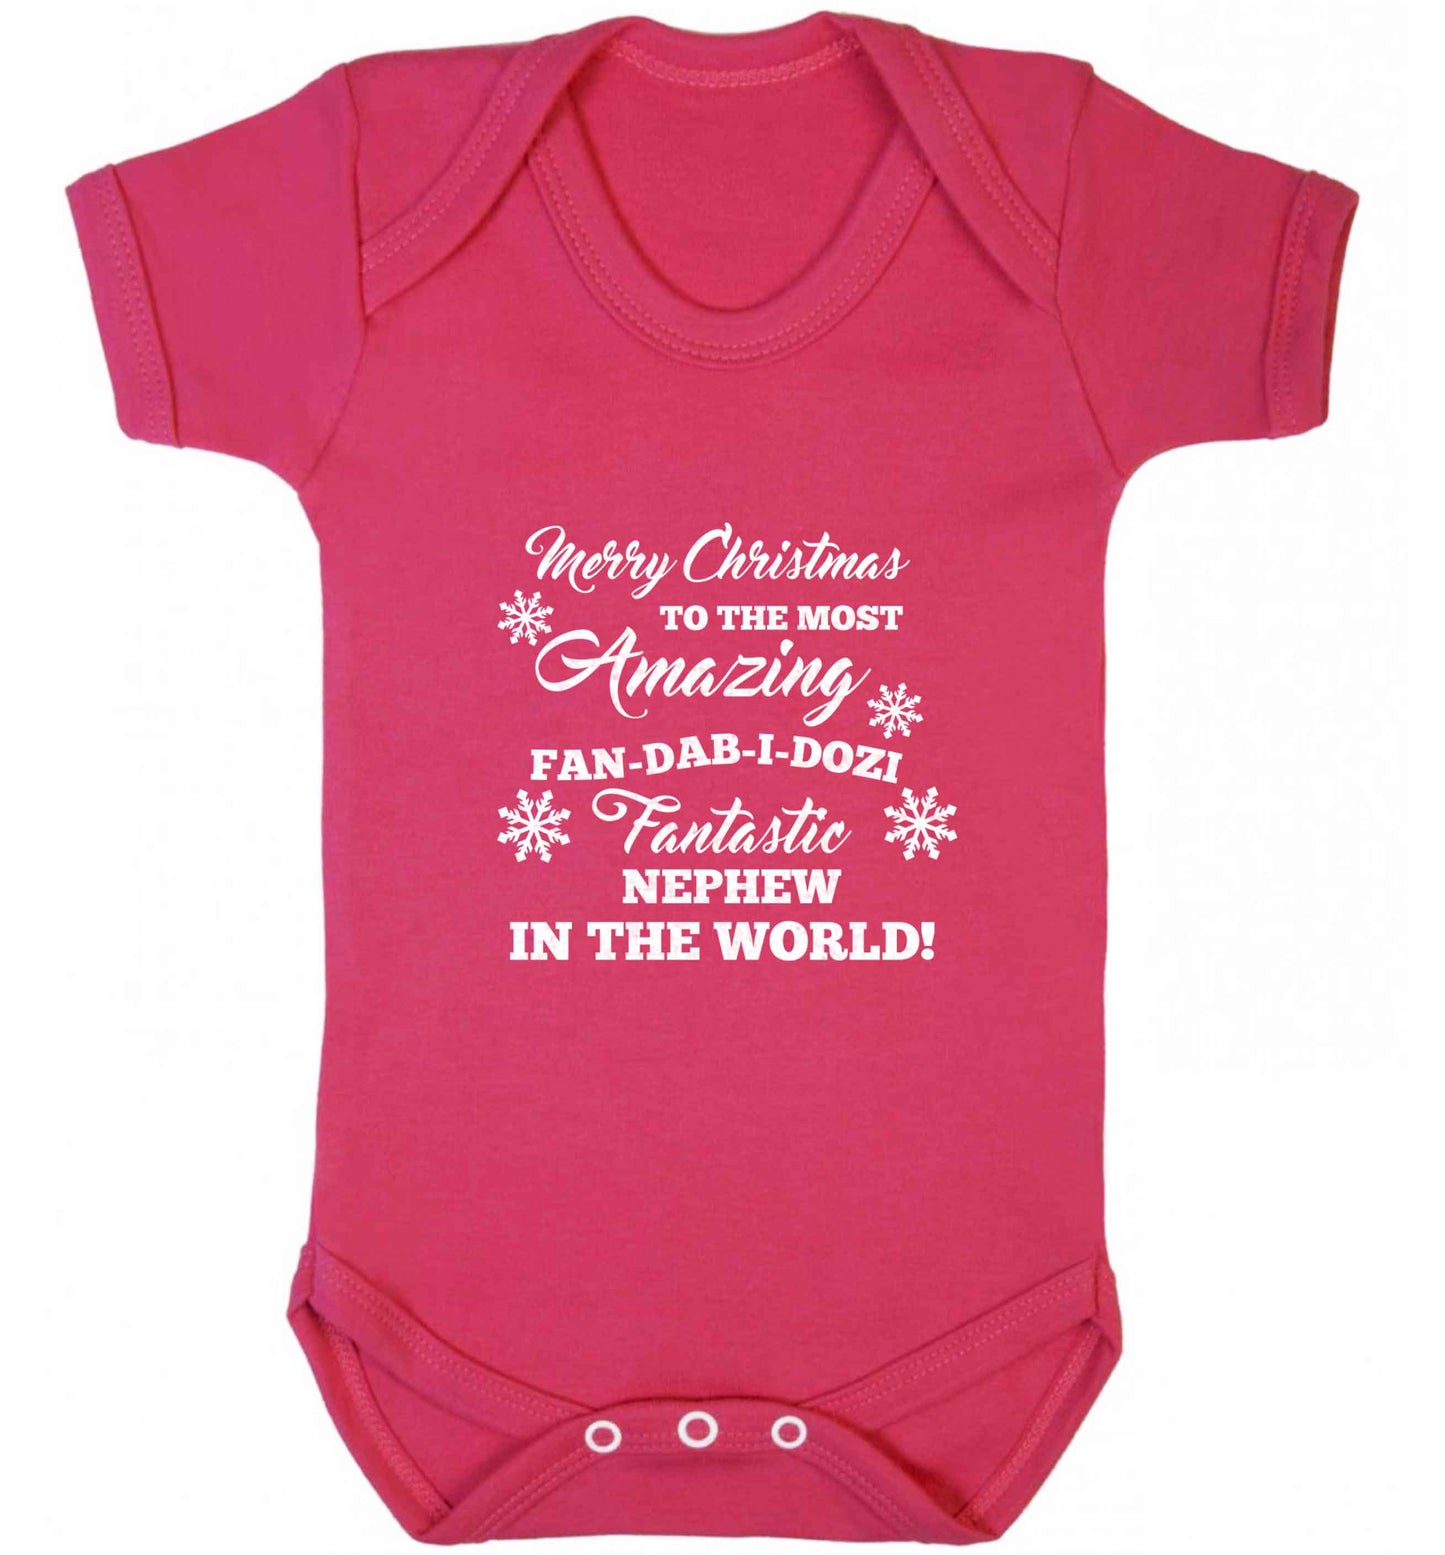 Merry Christmas to the most amazing fan-dab-i-dozi fantasic Nephew in the world baby vest dark pink 18-24 months